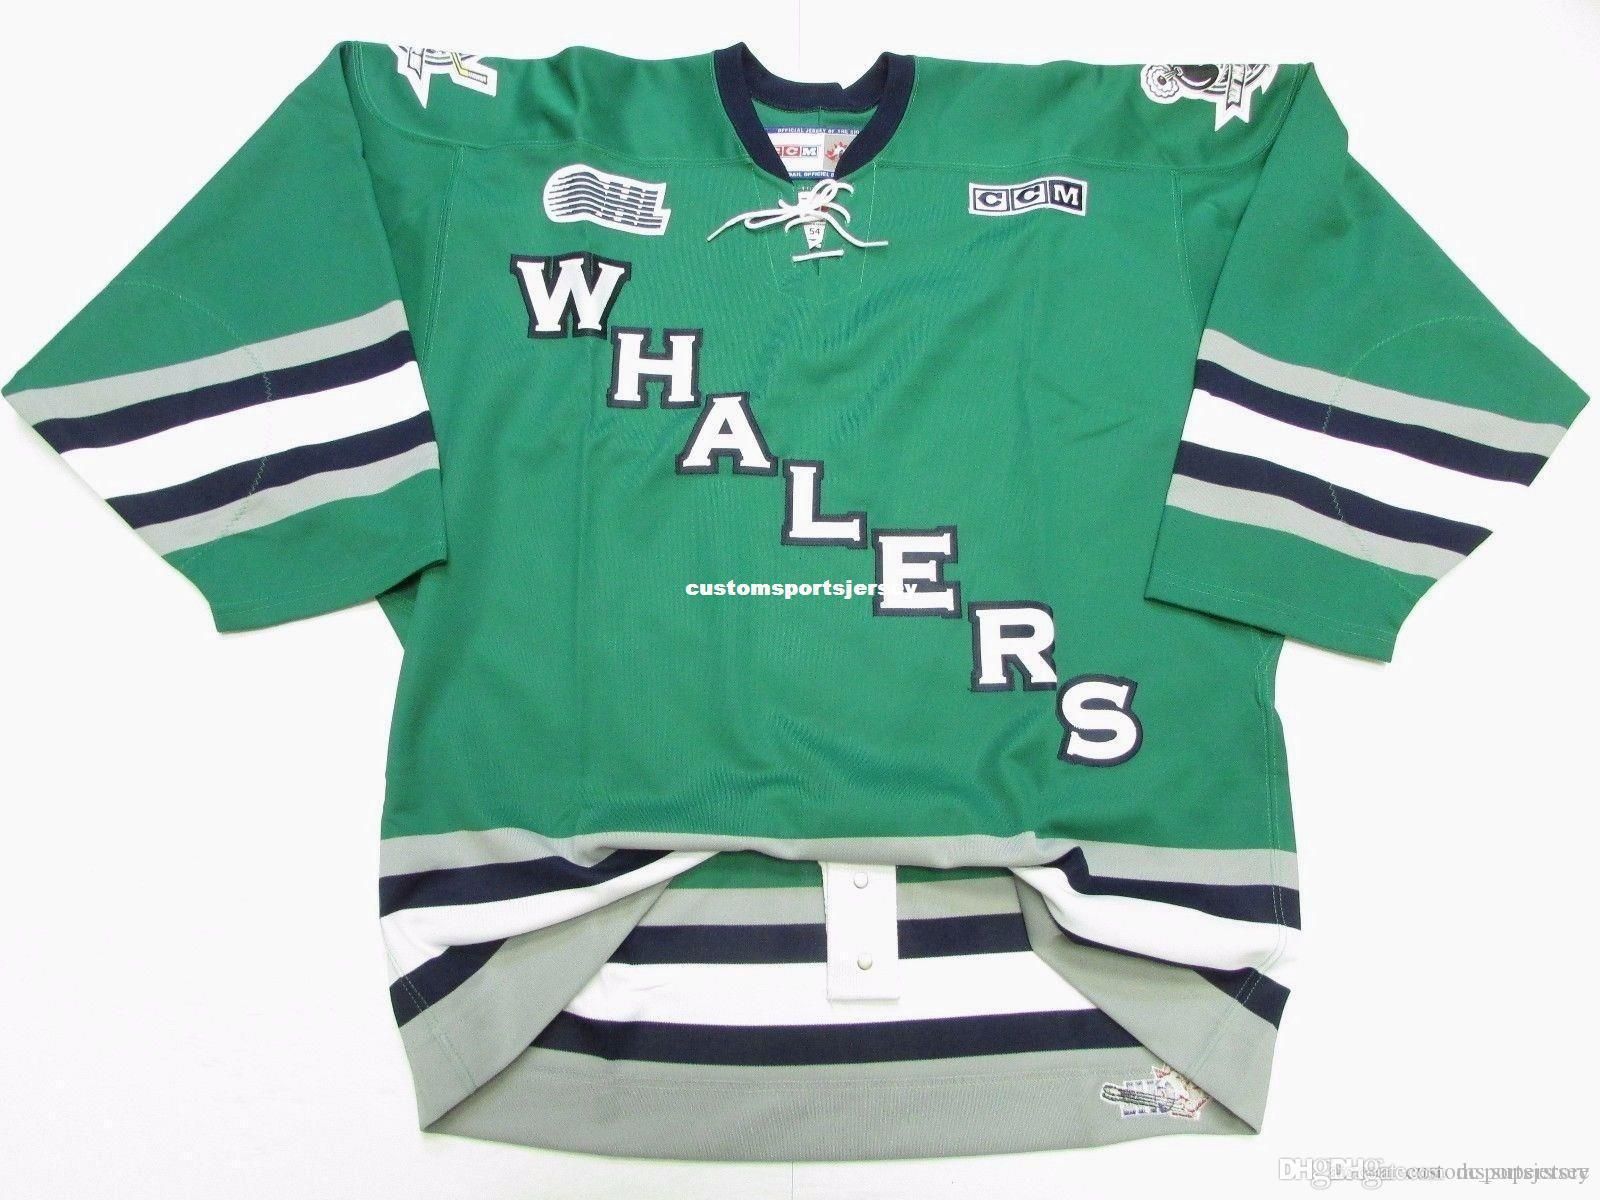 plymouth whalers jersey for sale